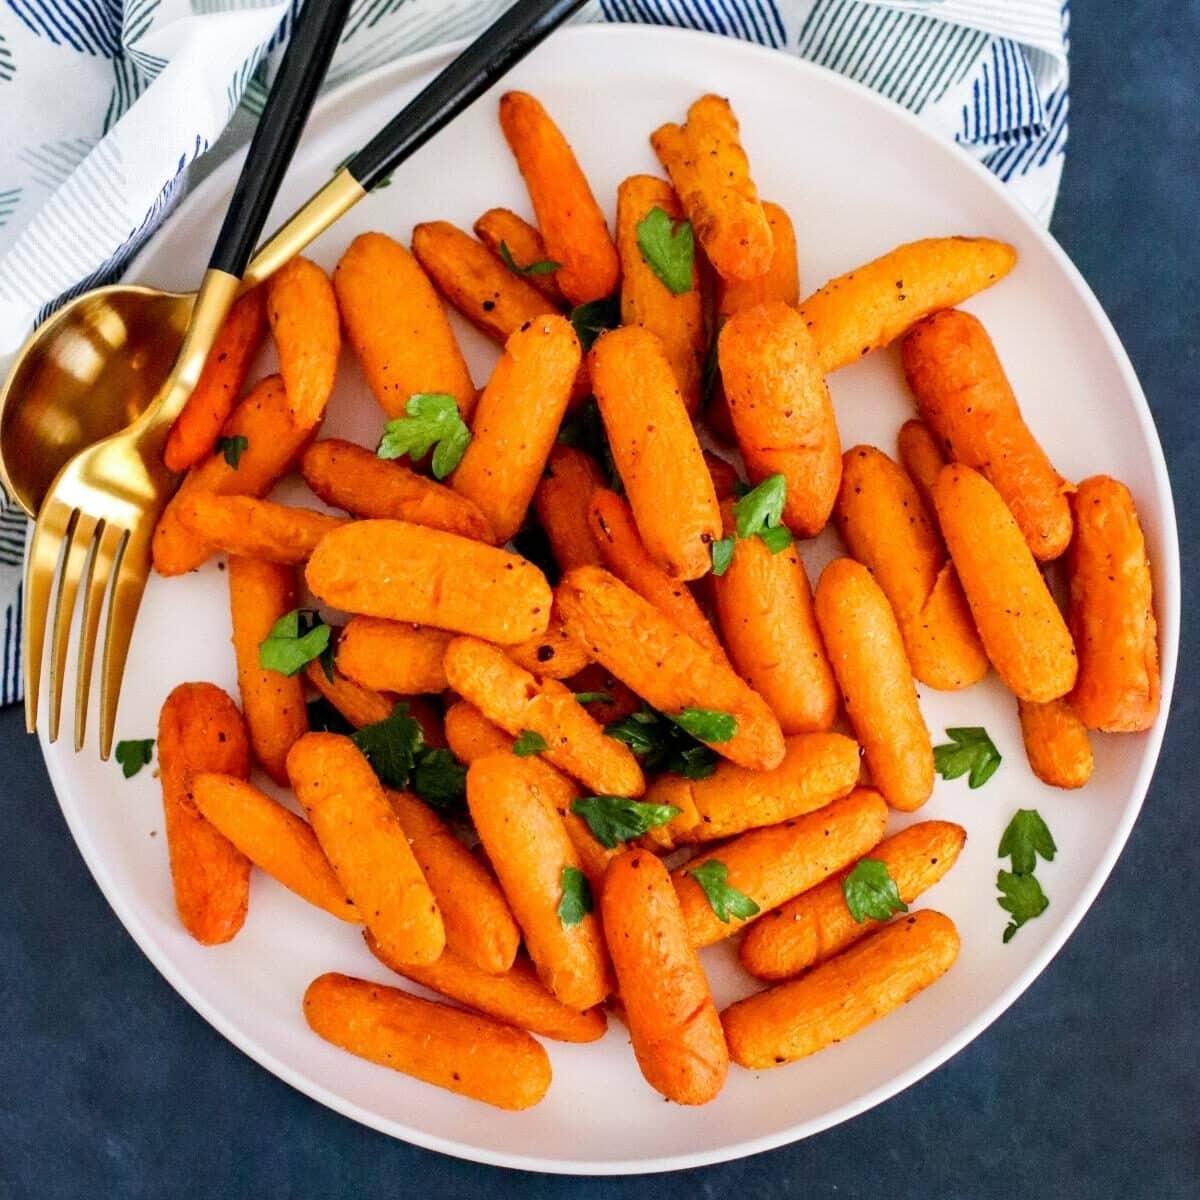 Plate of air fried carrots garnished with fresh parsley with serving utensils on the side.